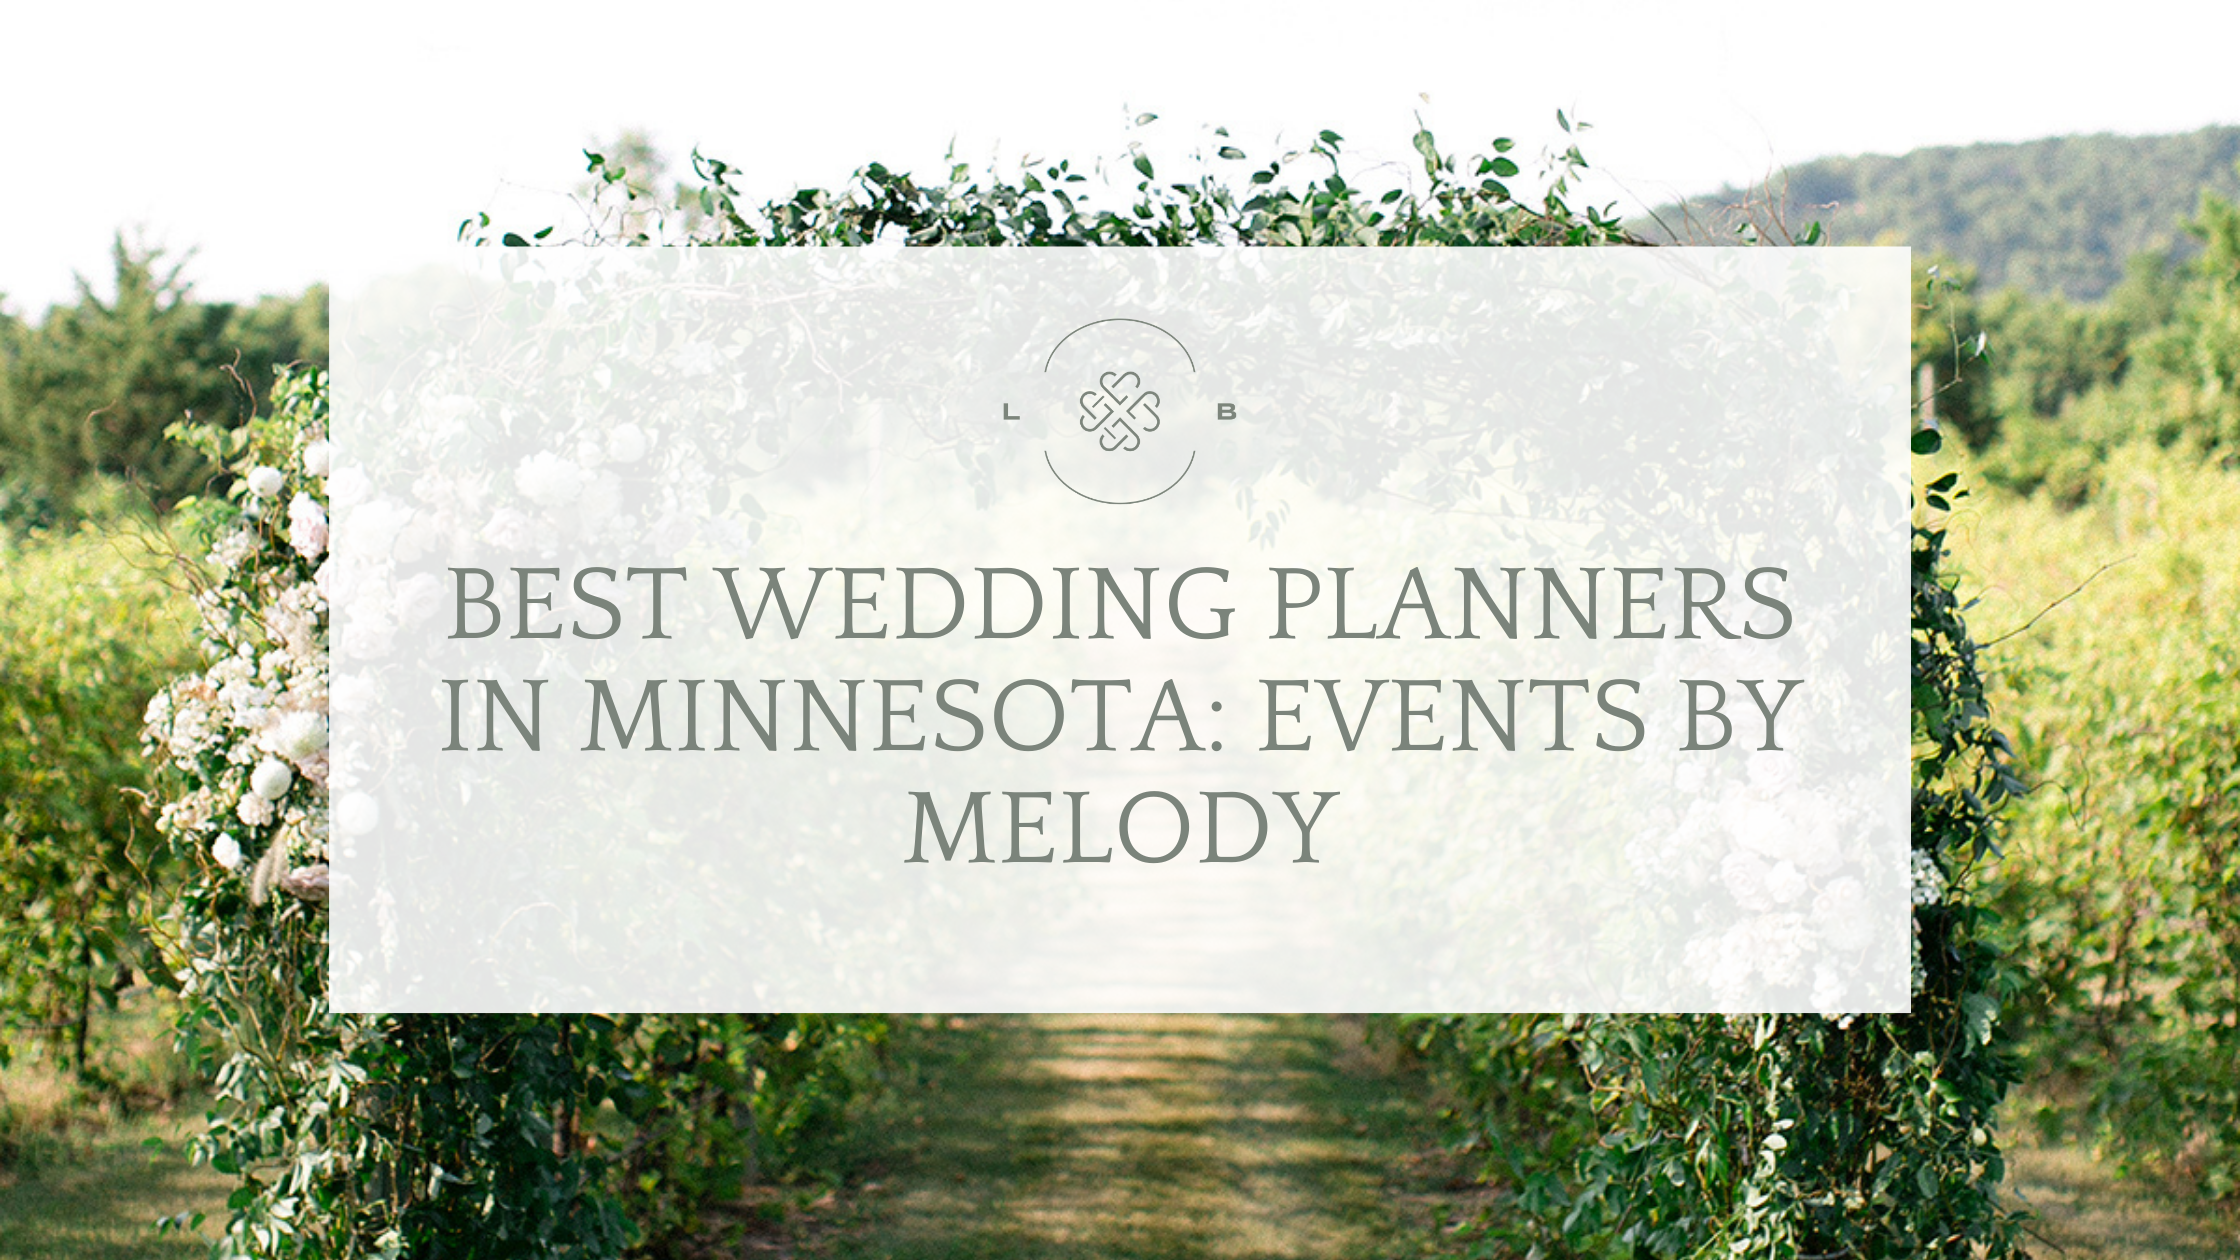 Best wedding planners in Minnesota Events By Melody